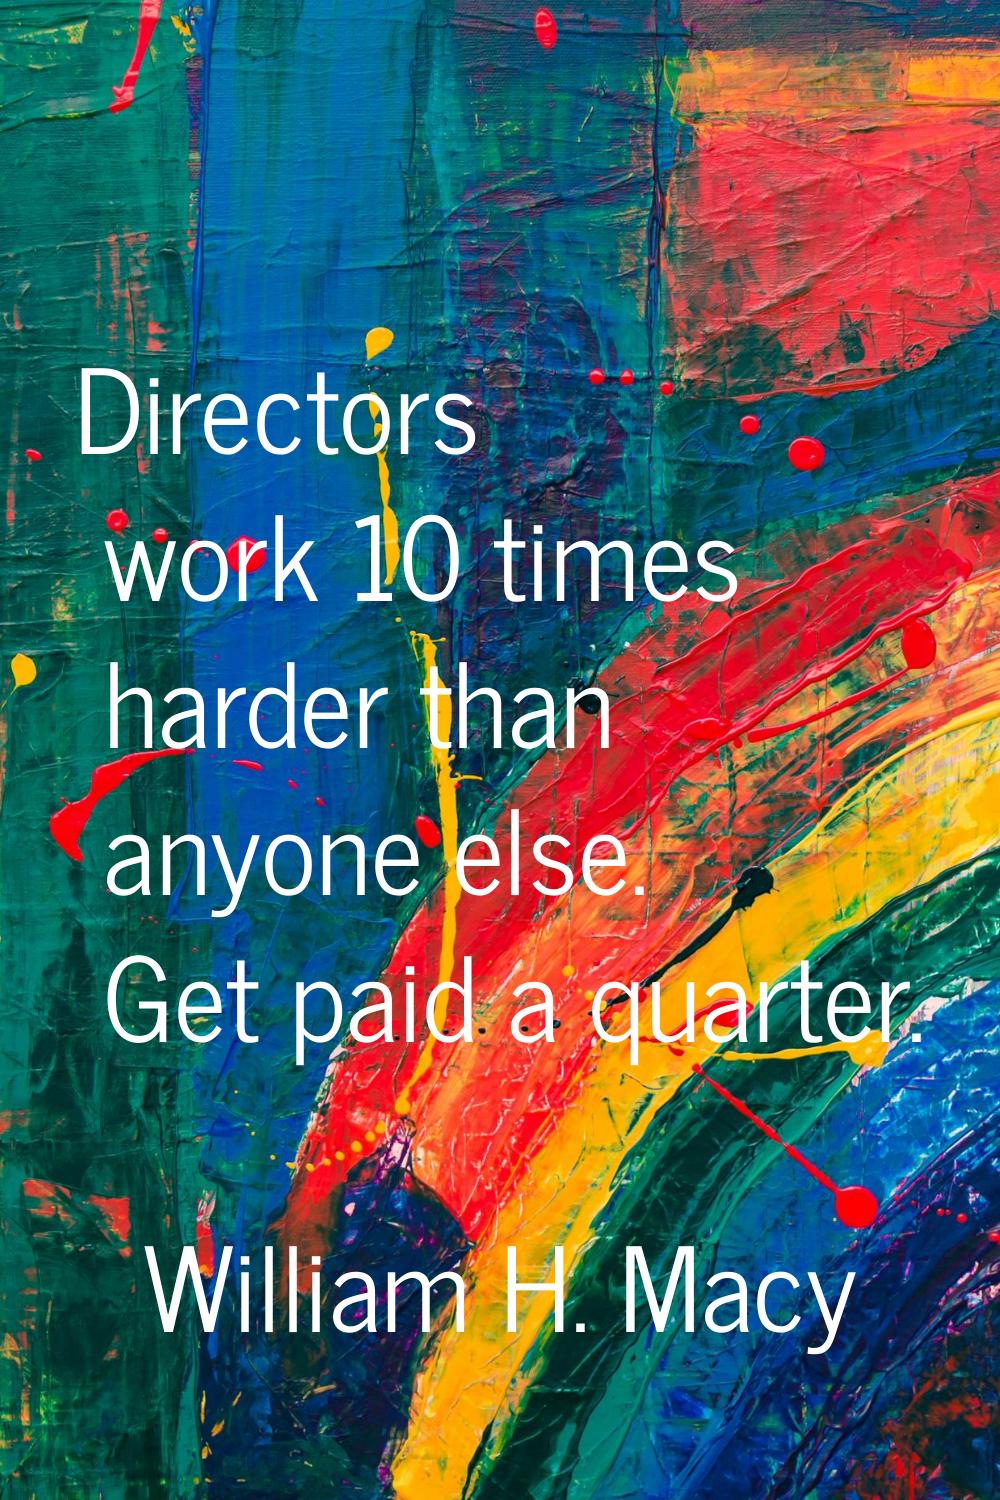 Directors work 10 times harder than anyone else. Get paid a quarter.